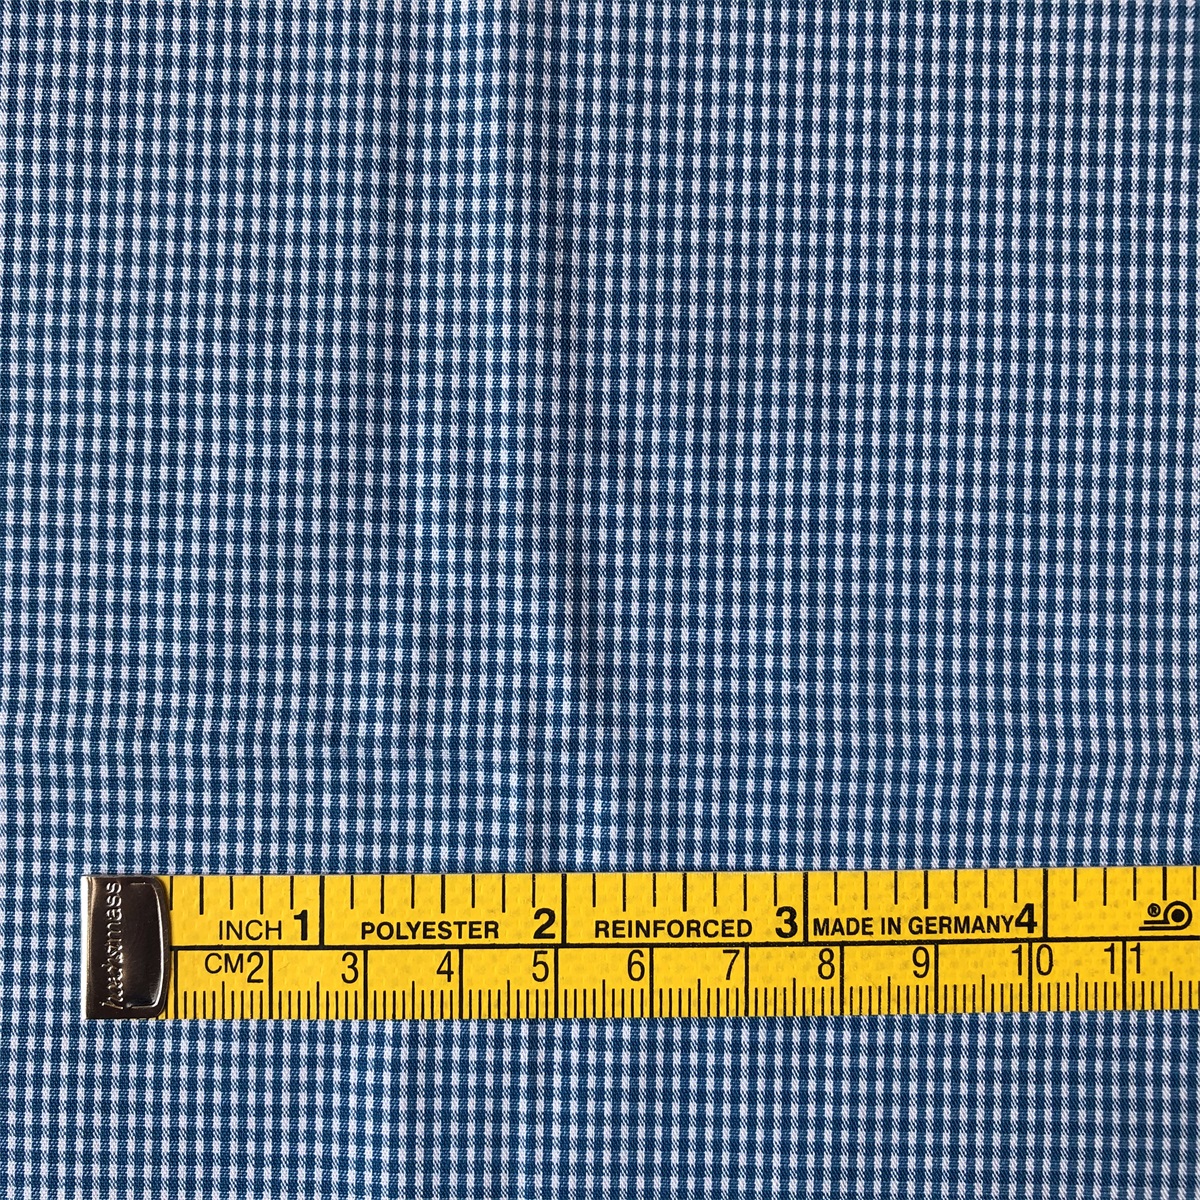 Cotton Yarn Dyed Fabric by compact yarn 100% cotton yarn dyed classic plaid shirts woven fabric for men's casual shirts